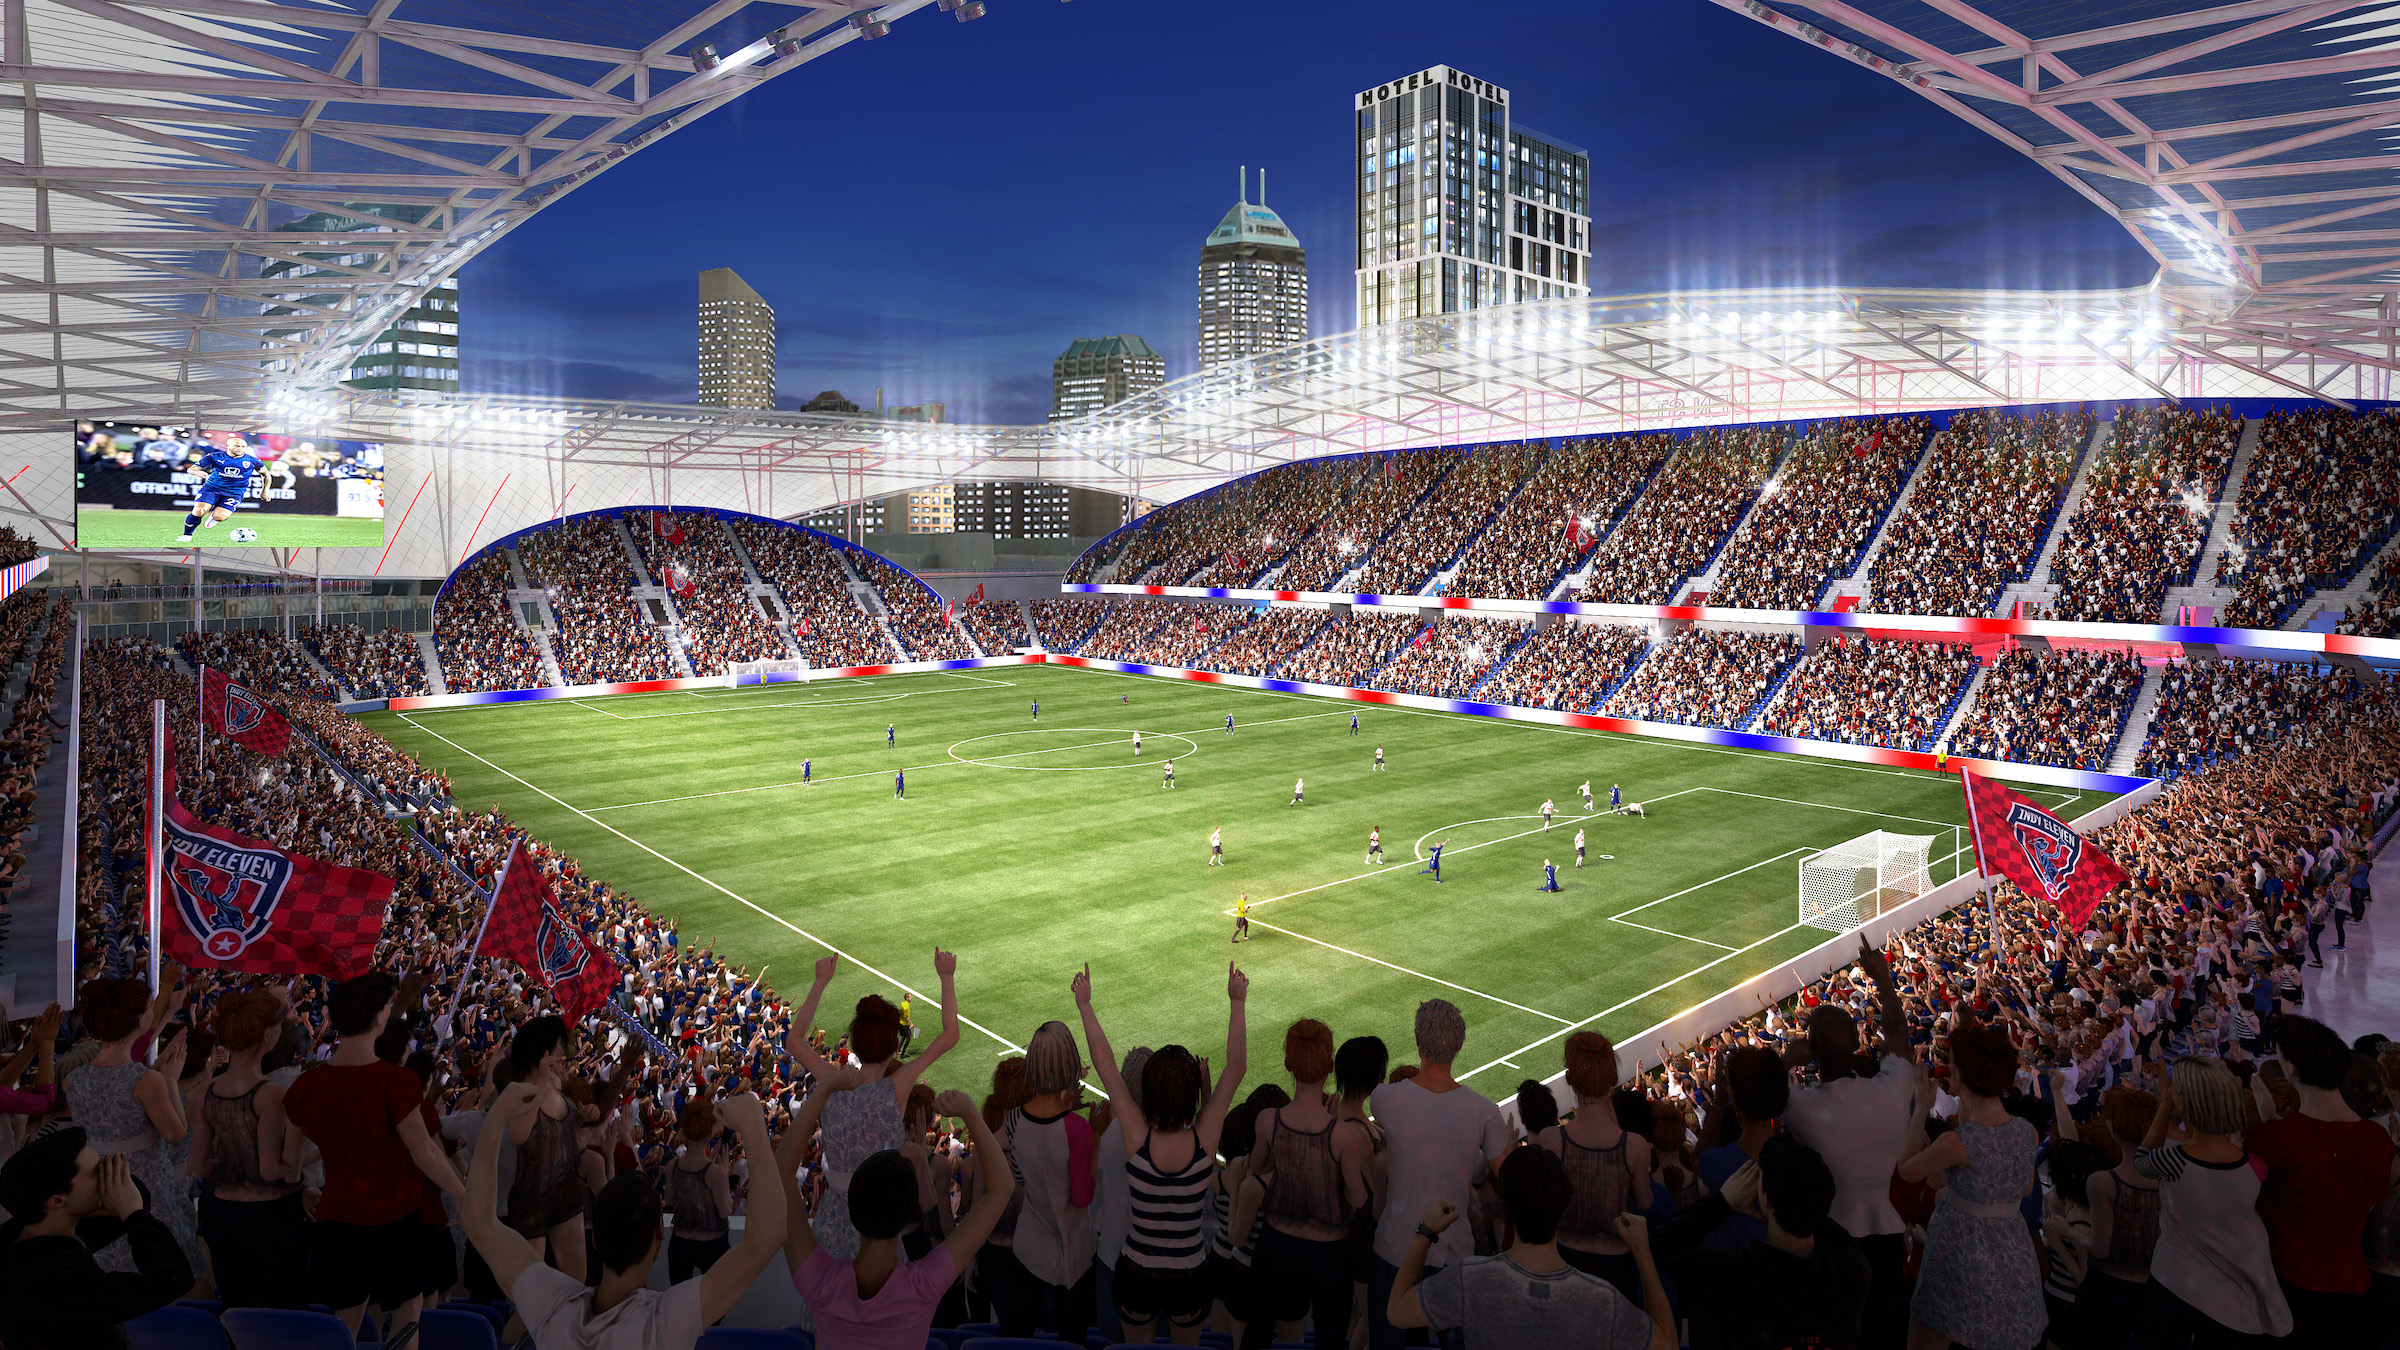 Eleven Park soccer stadium Indianapolis, Indy Eleven, Keystone Group, Populous -Bowl